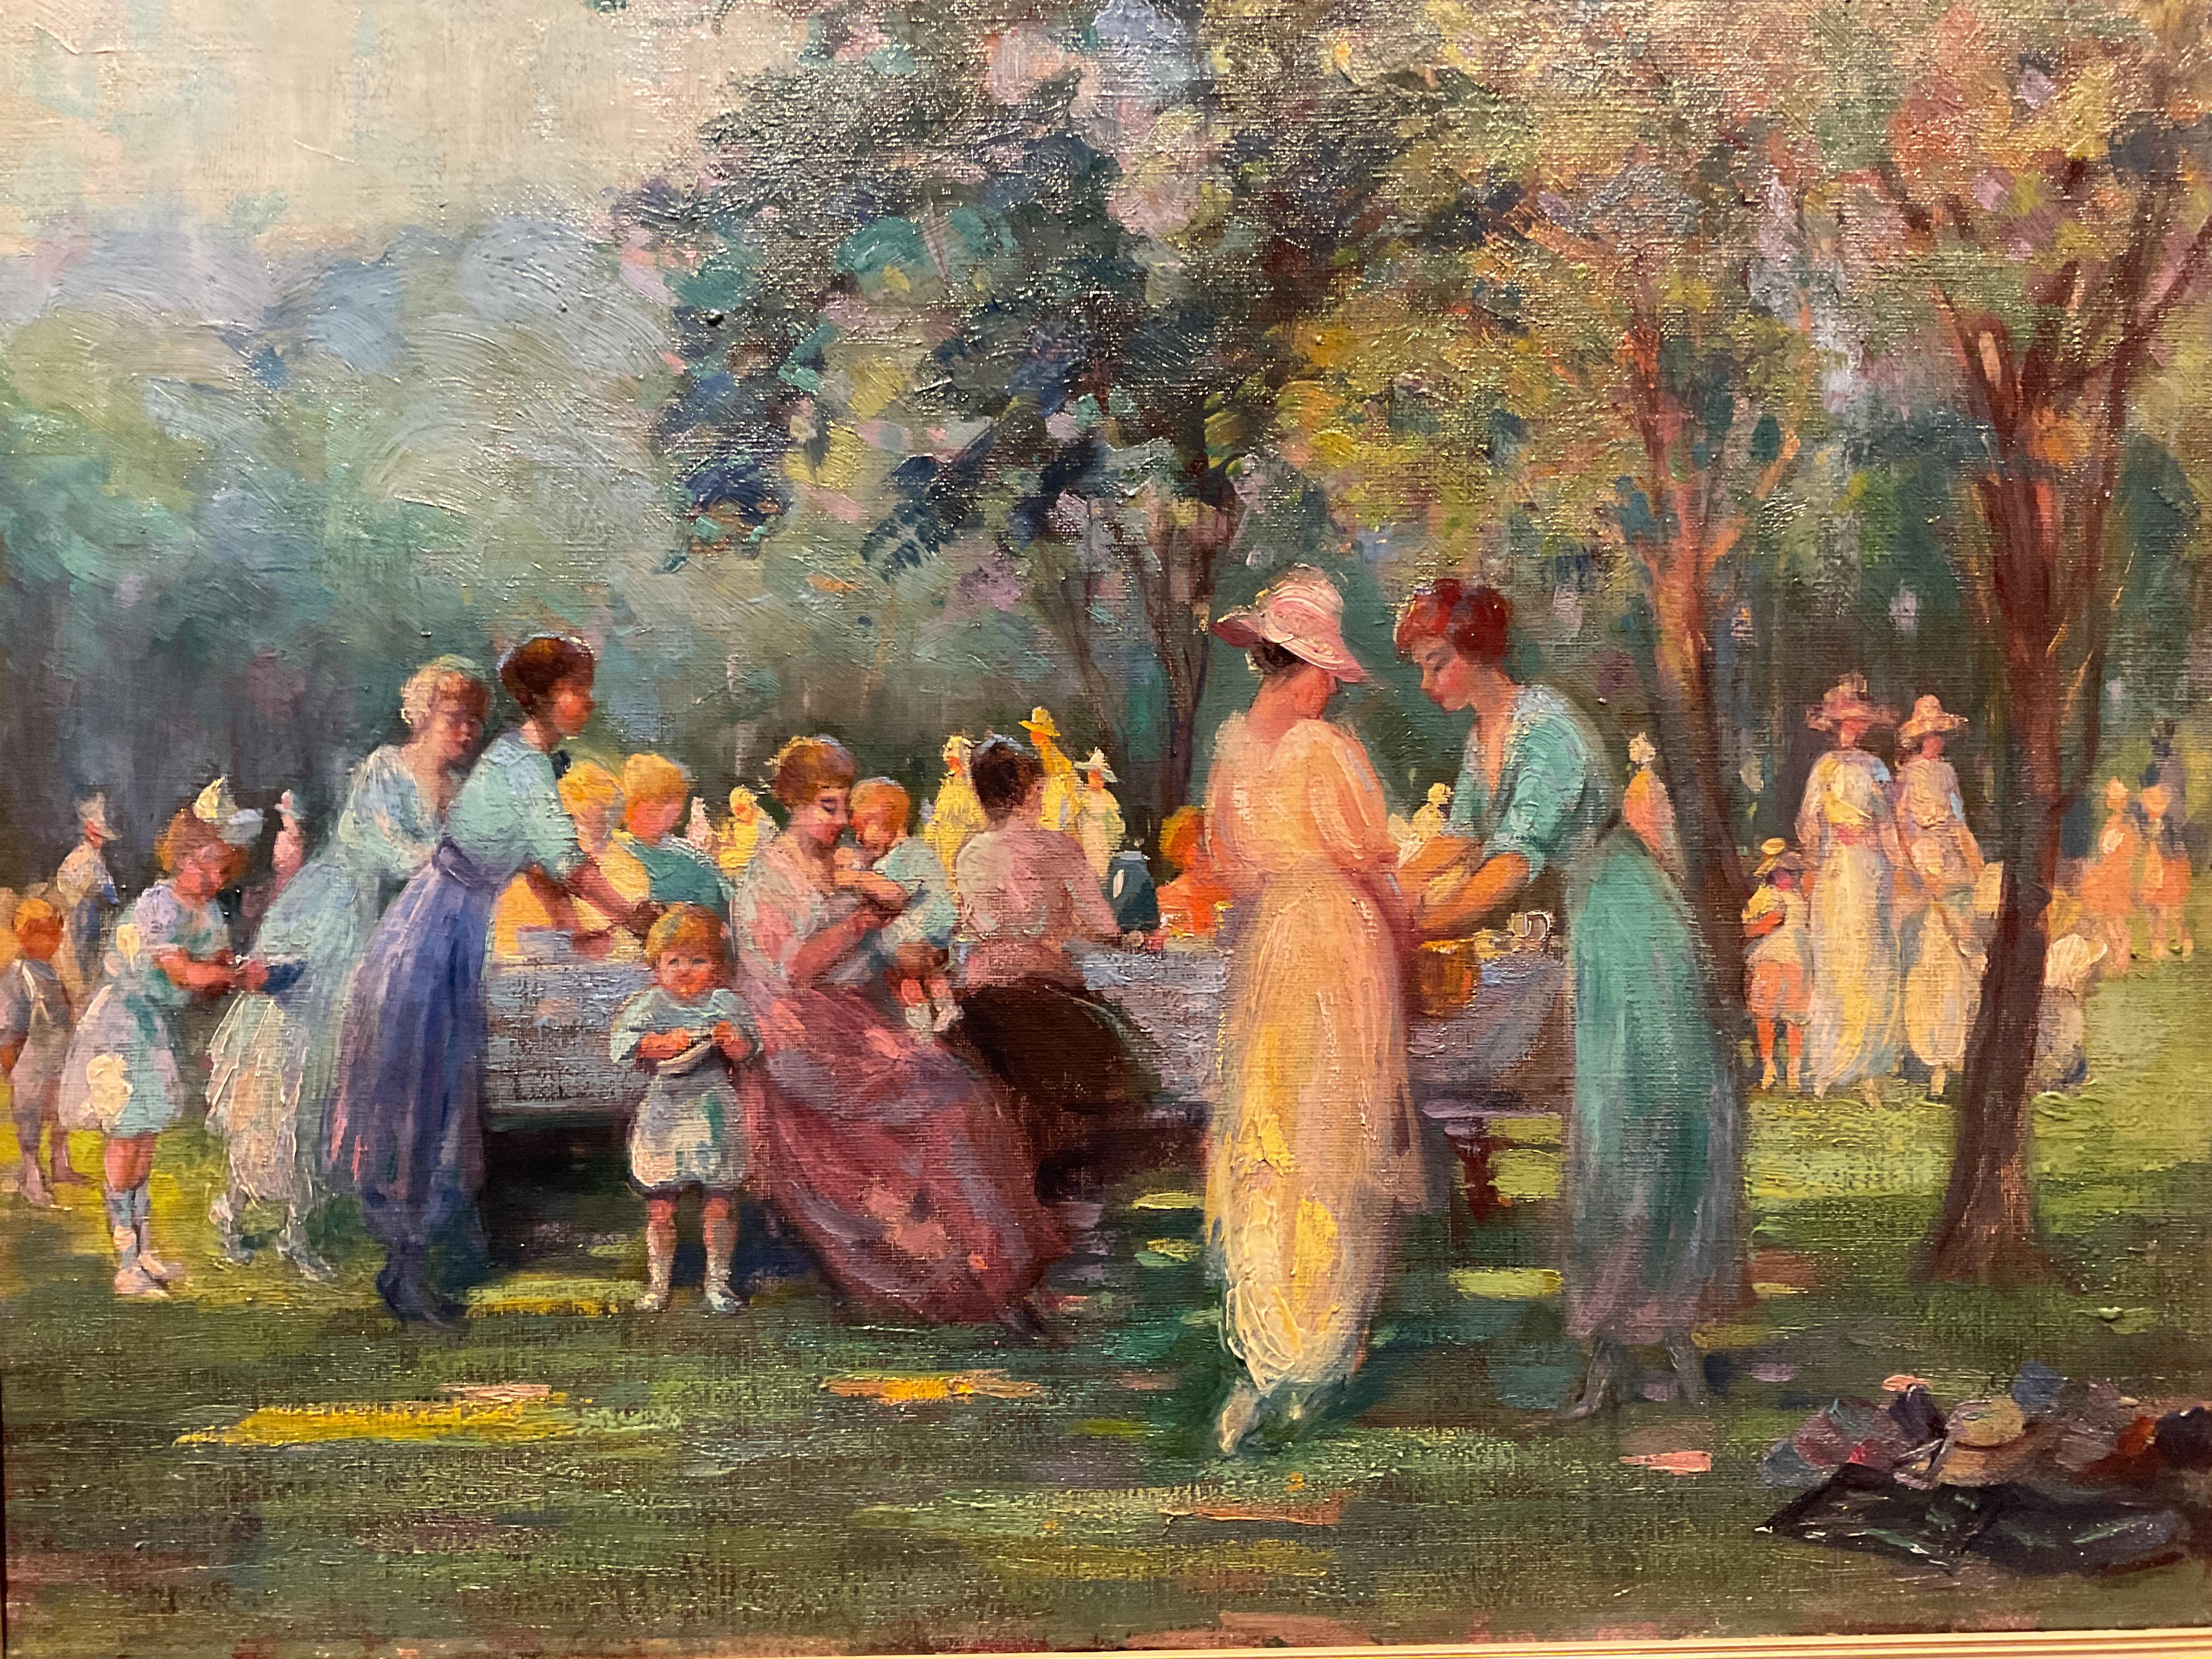 Fine Impressionist American School Oil on Canvas; Family Picnic or Outing, 1925 - Painting by Unknown